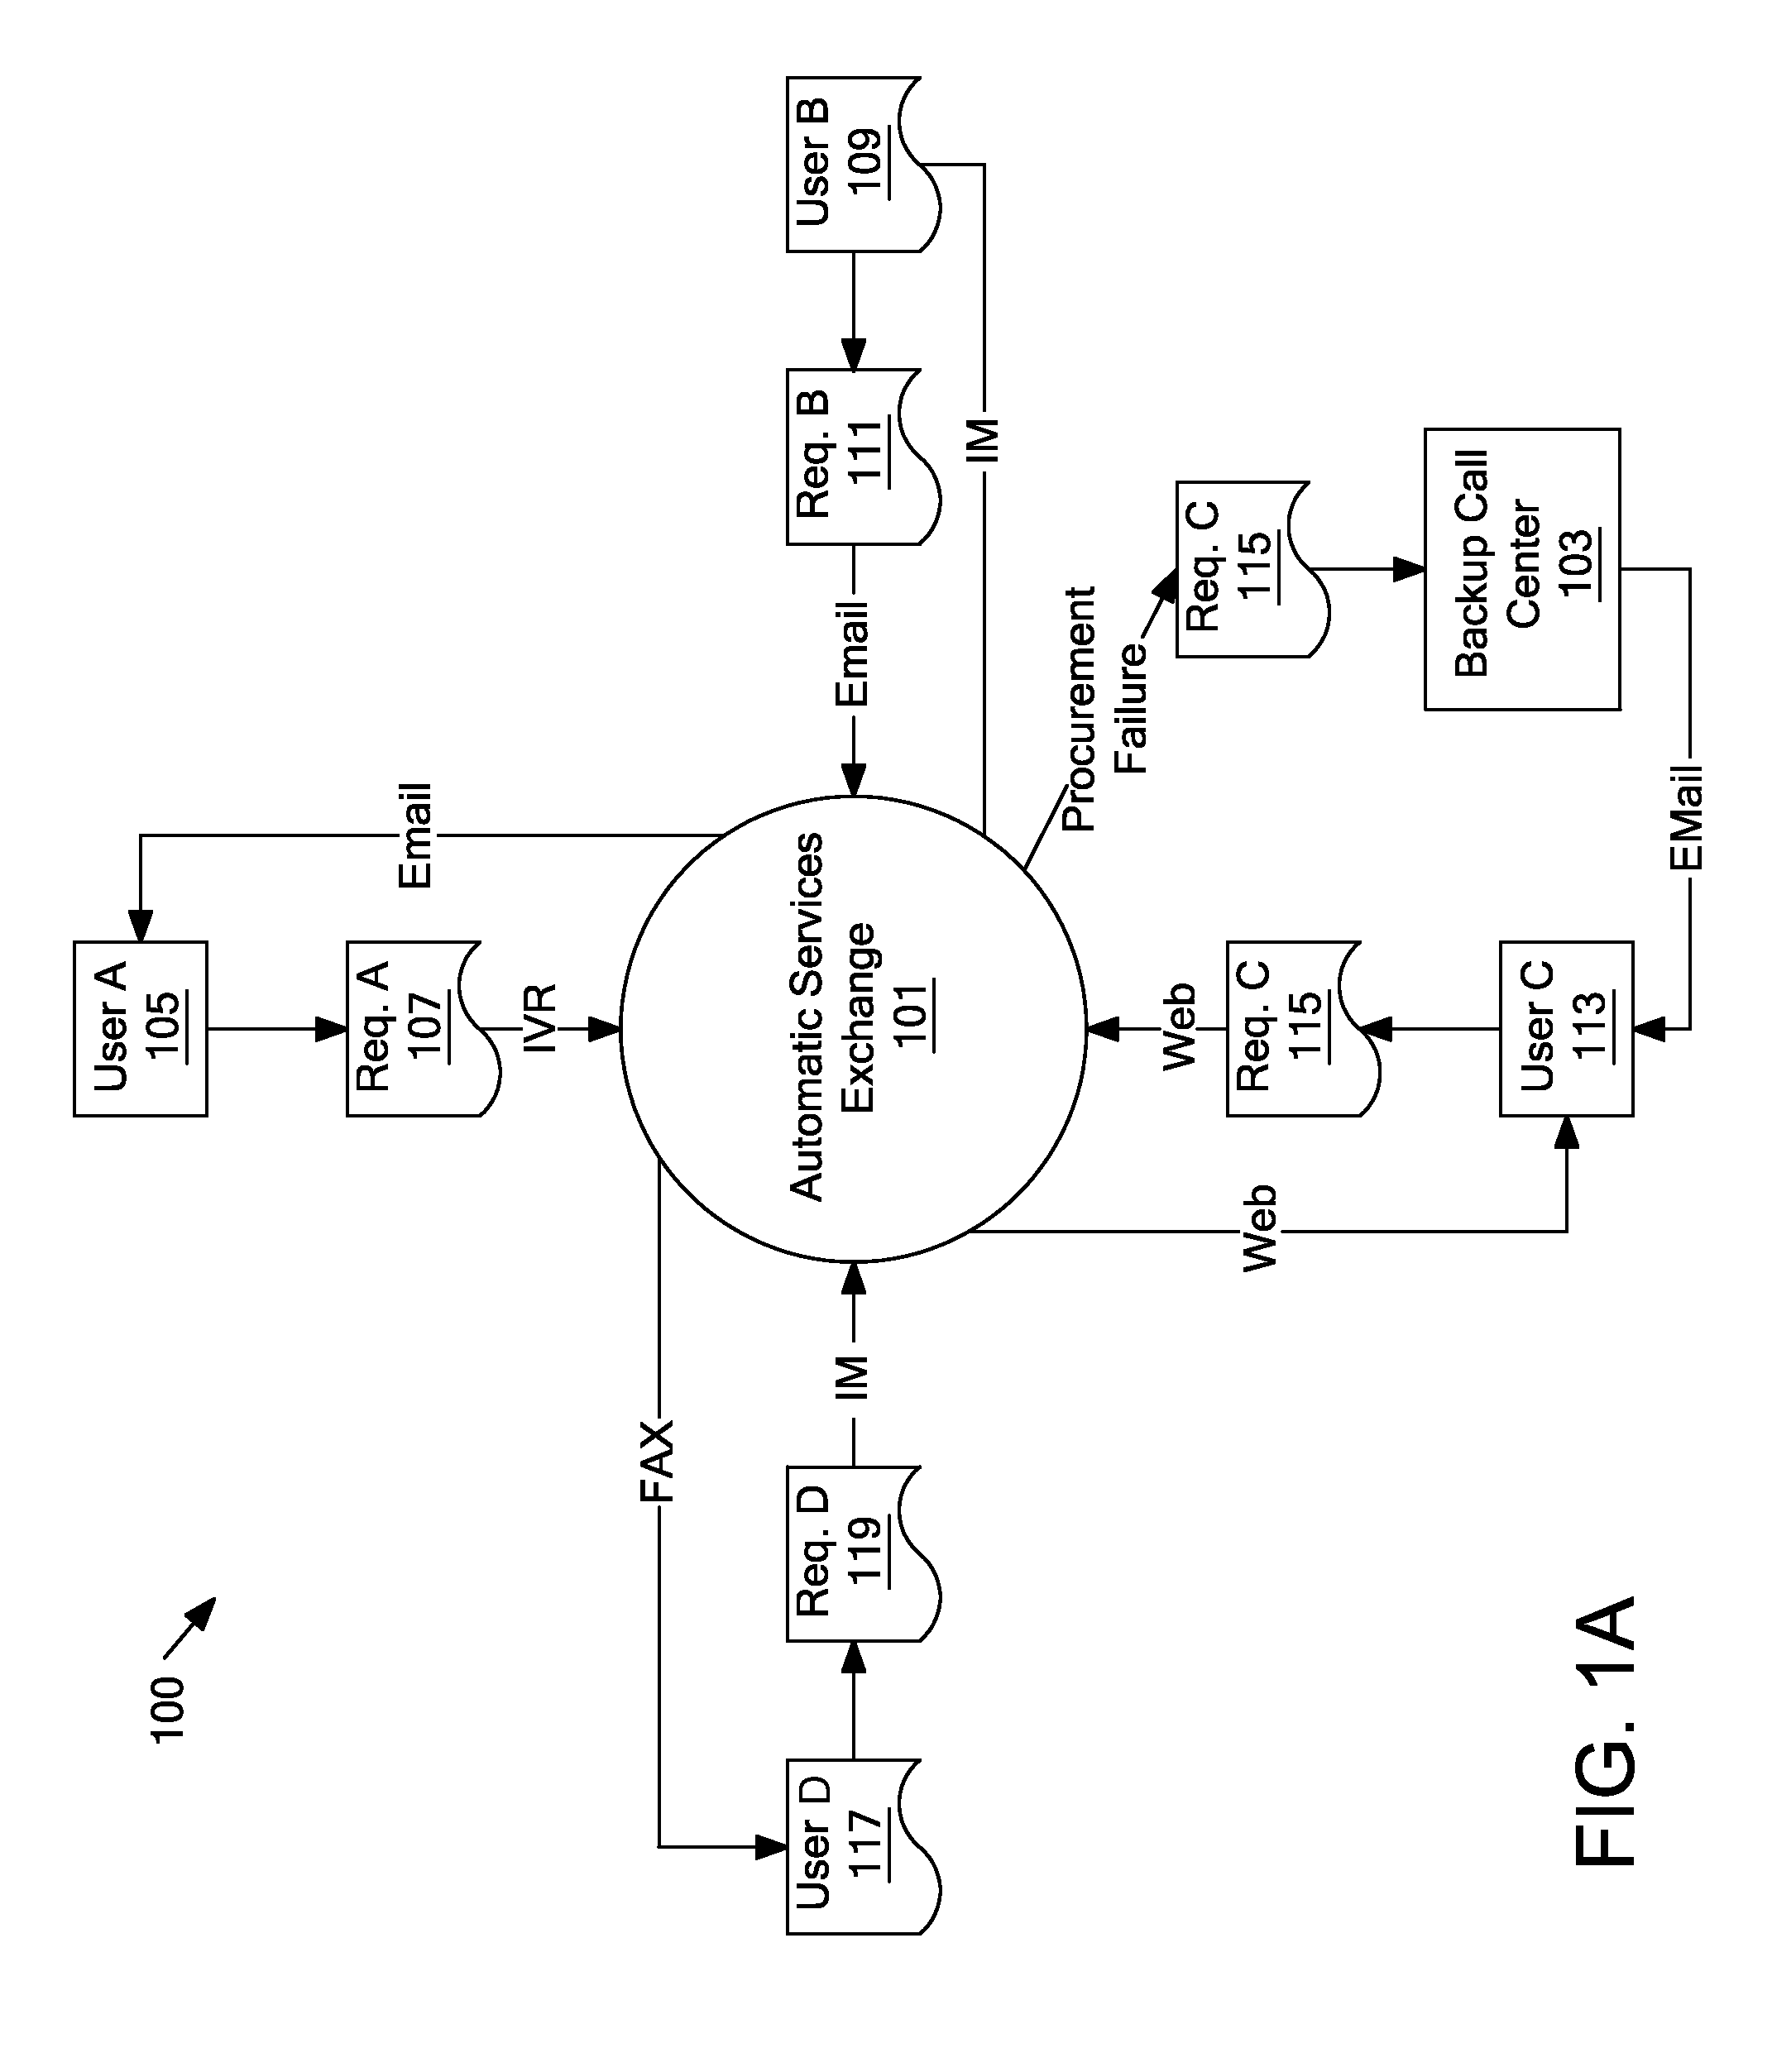 Method and system for delegation of travel arrangements by a temporary agent